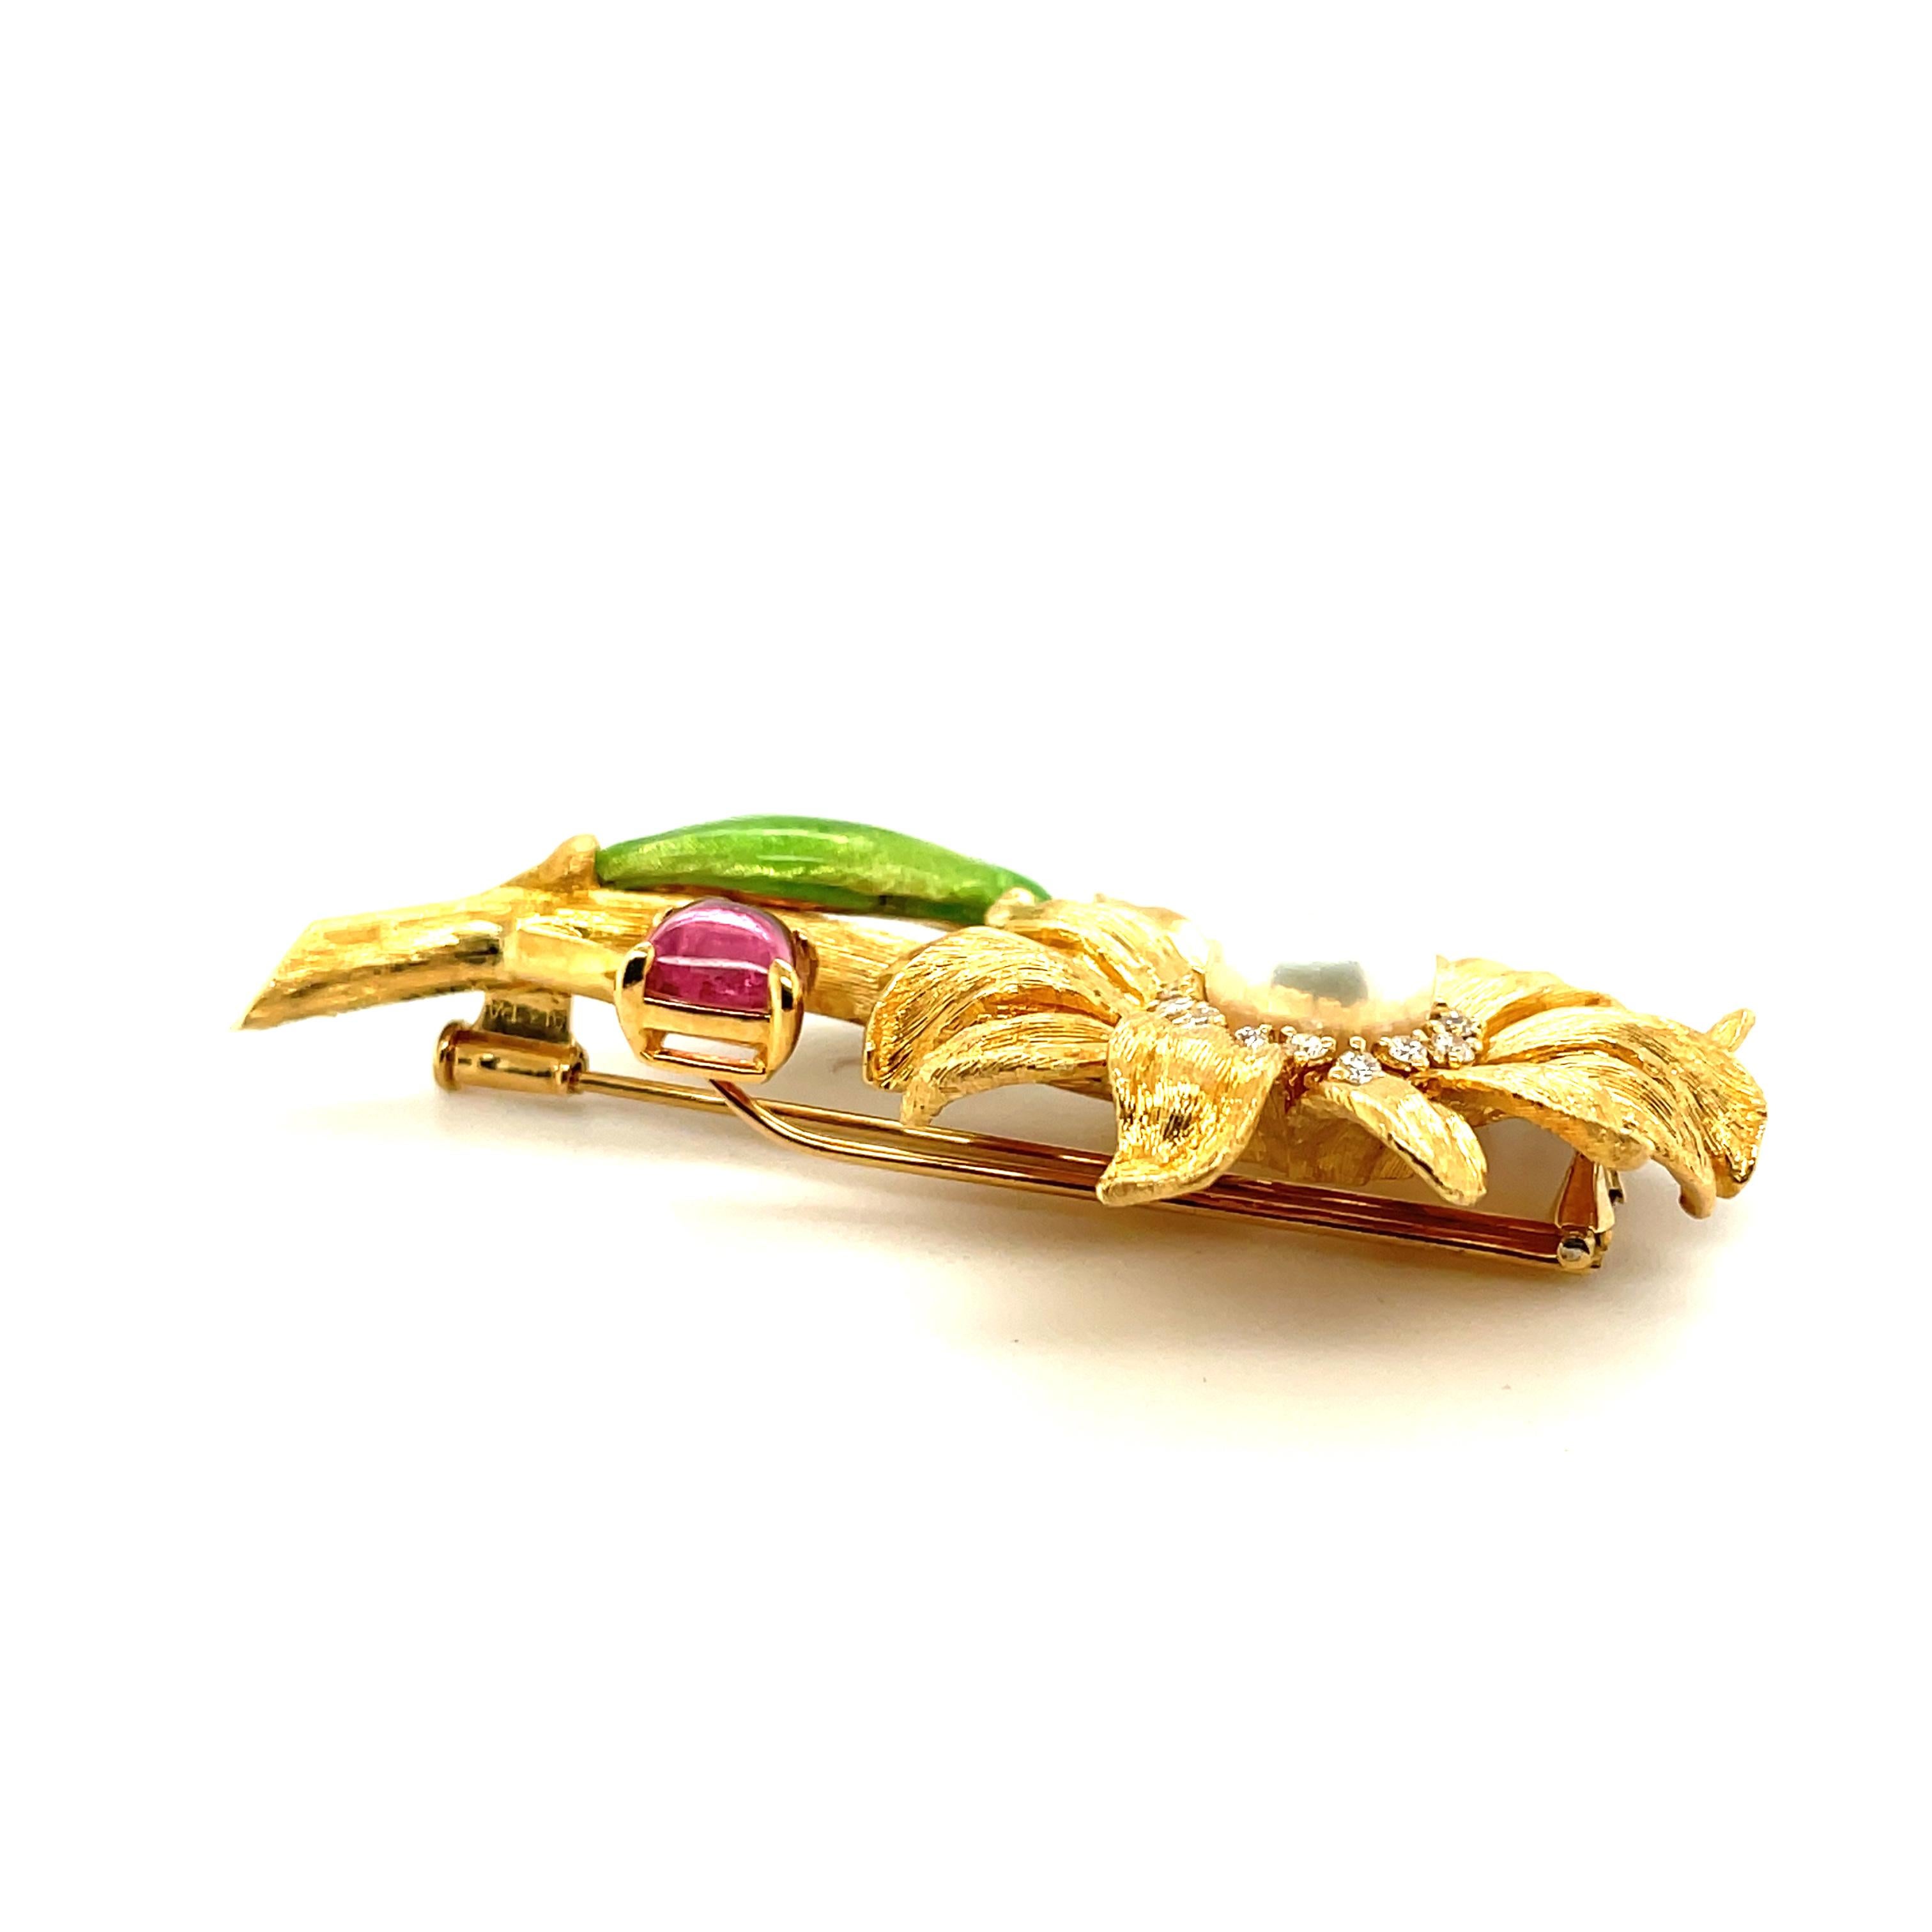 Women's 18k Yellow Gold, Pink Tourmaline, Diamond and Pearl Flower Brooch For Sale